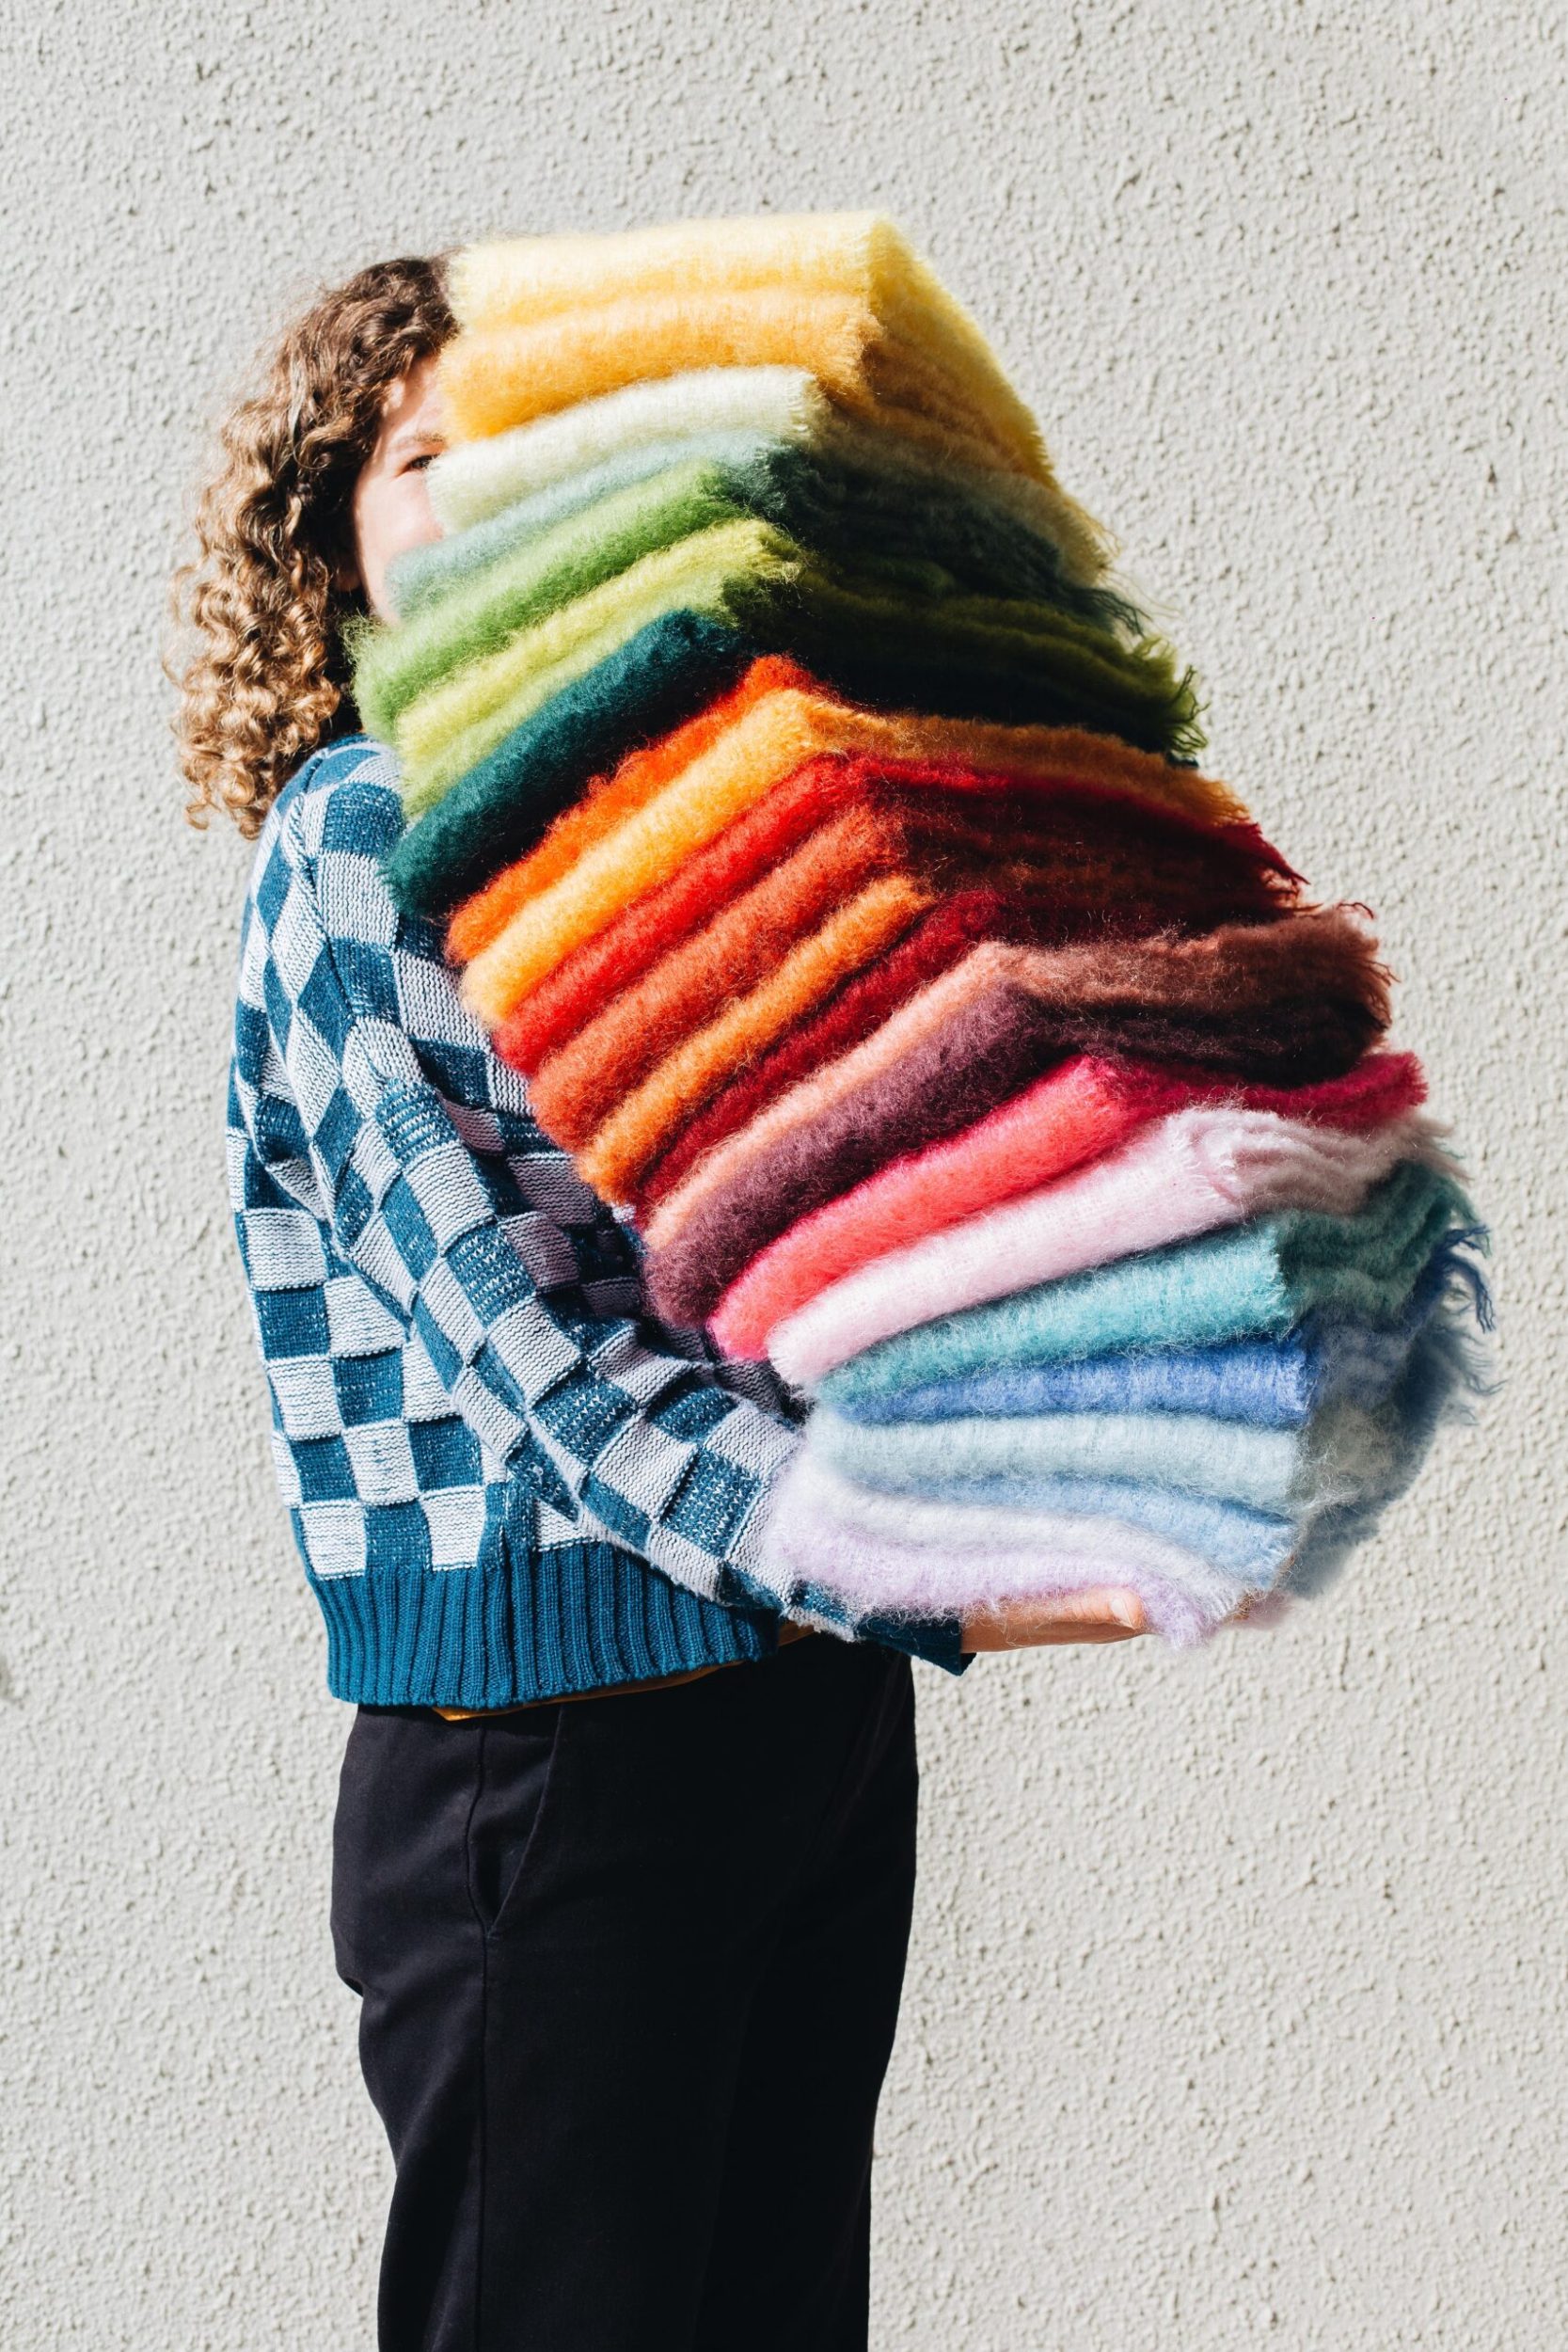 Fashion designer Millie Askew holding a tall stack of colourful textiles 